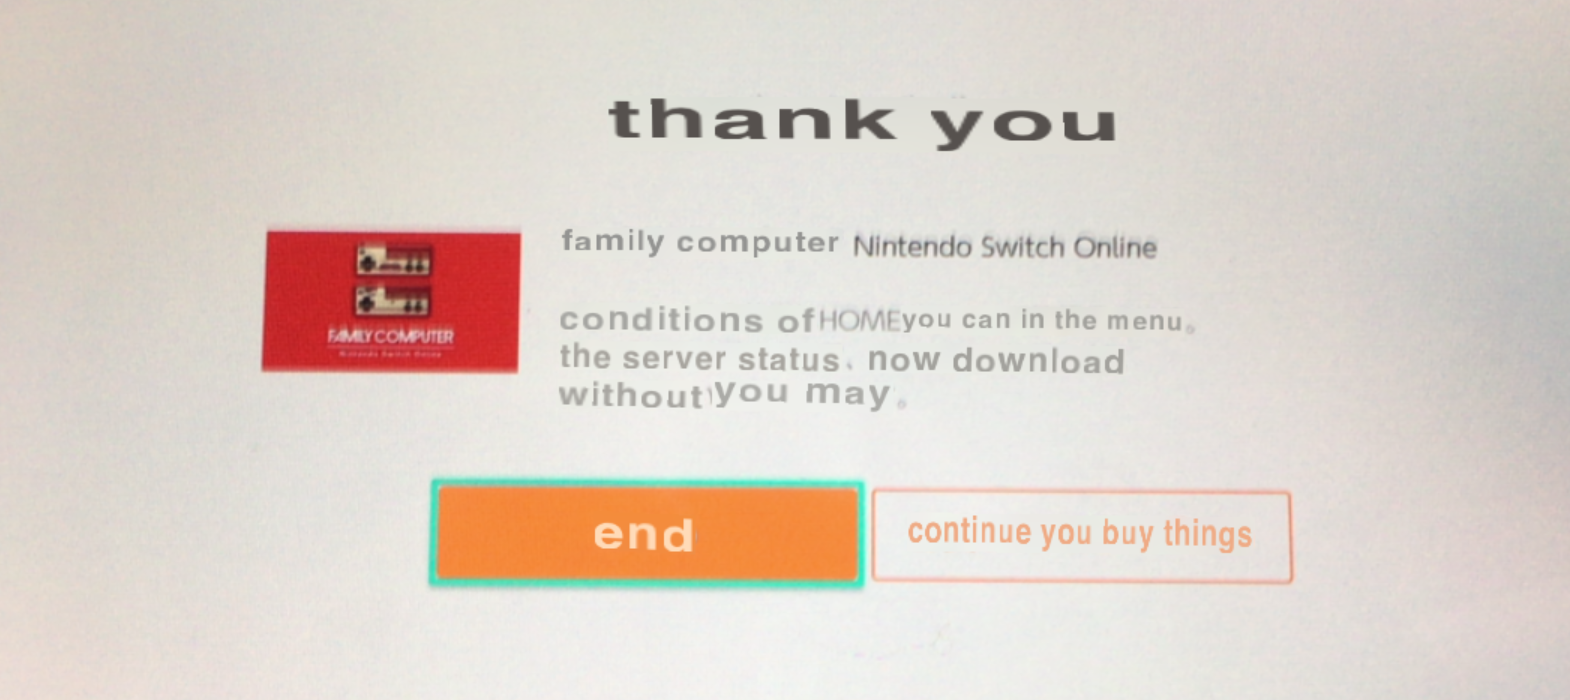 family computer nintendo switch online